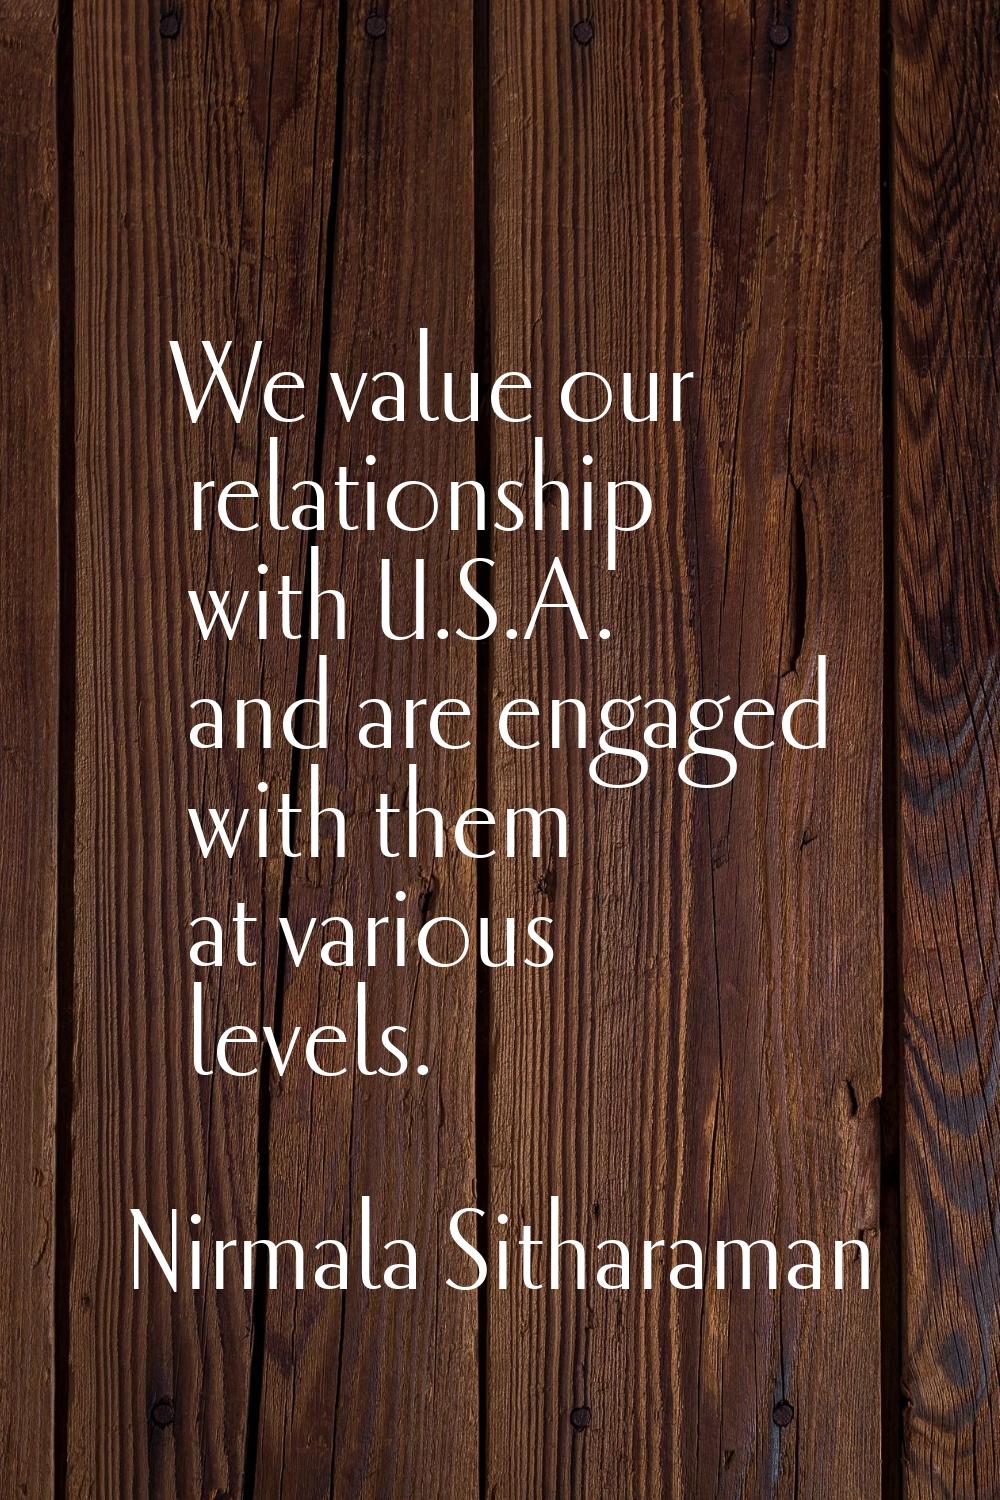 We value our relationship with U.S.A. and are engaged with them at various levels.